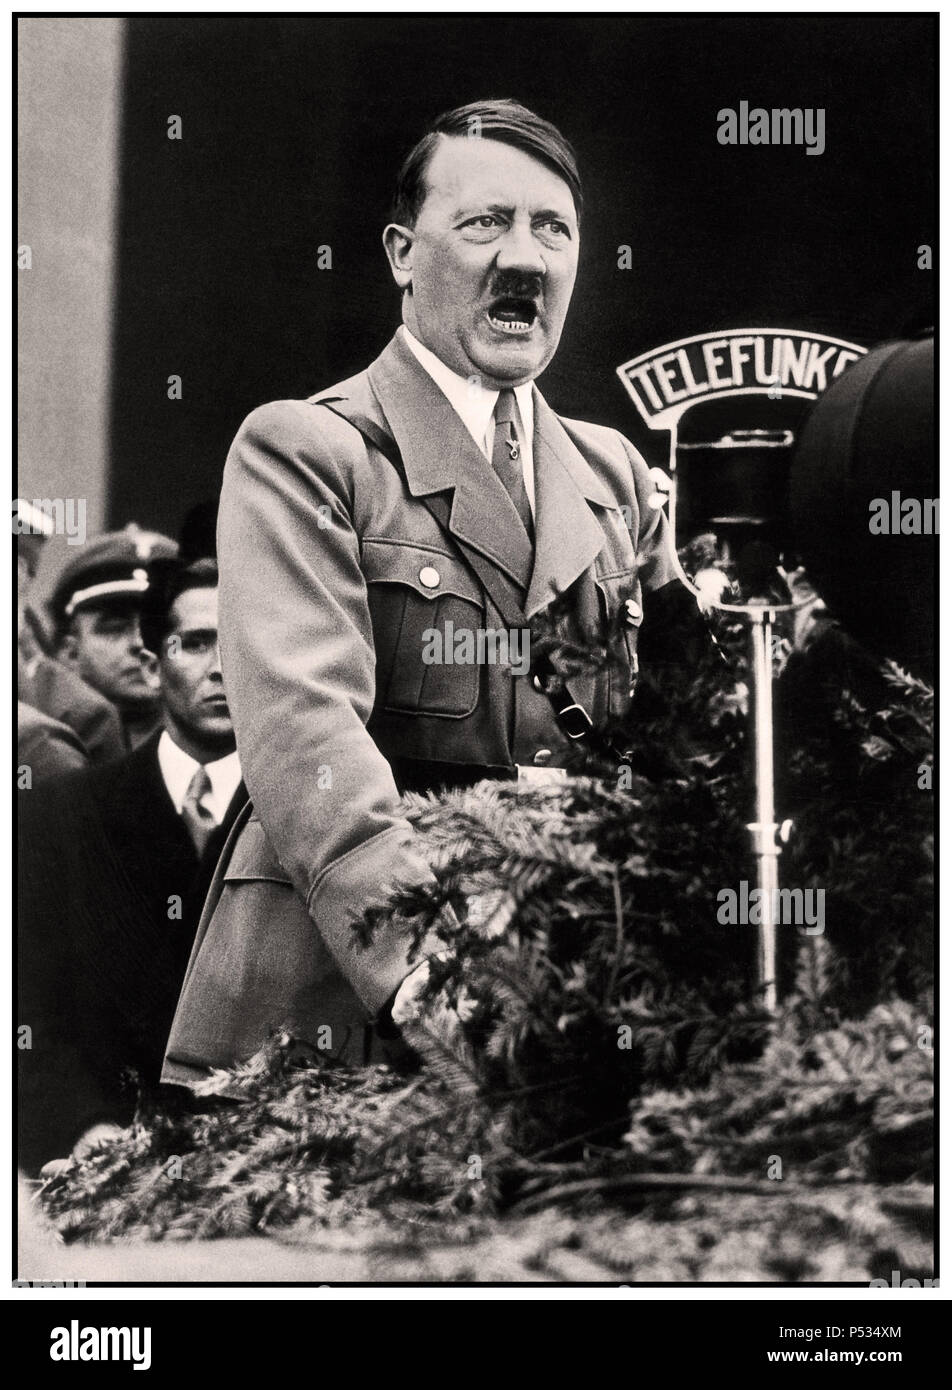 1930's Adolf Hitler speech with Telefunken Radio Microphone broadcasting to the German Nation standing at speaker's platform podium at a Nazi party rally at Nuremberg Germany Stock Photo